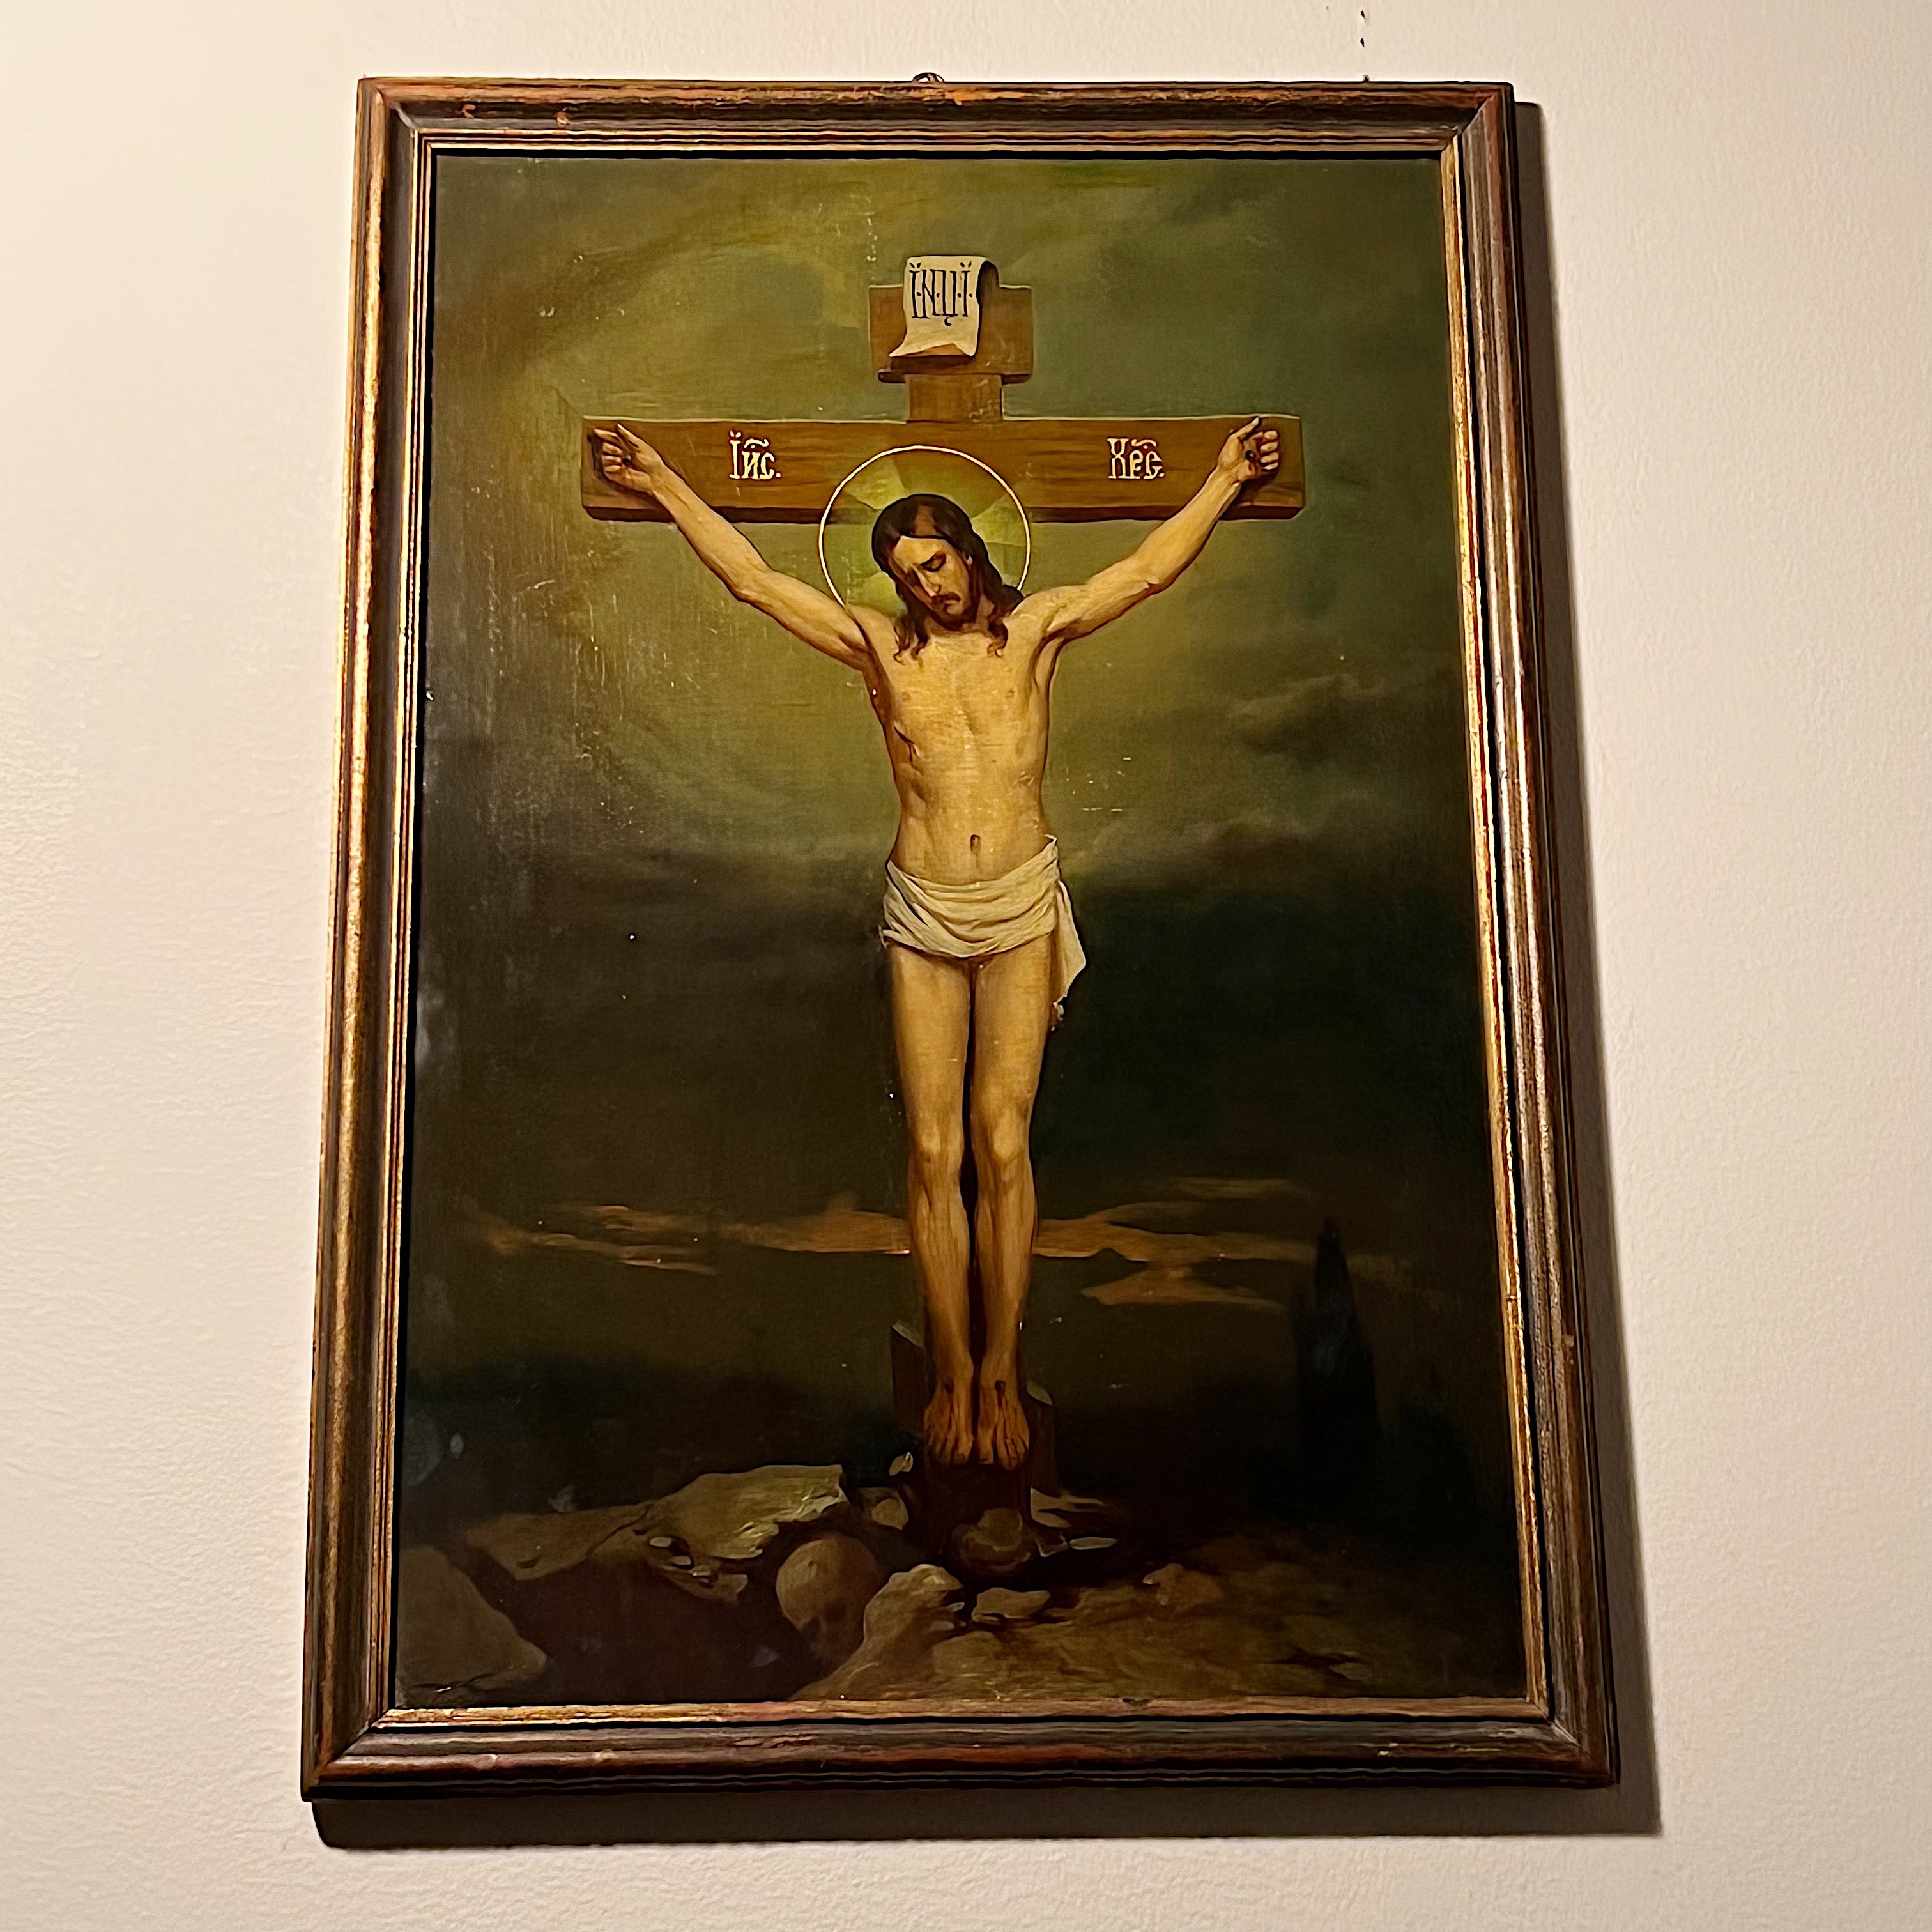 Antique Russian Crucifixion Painting with a Skull in the Rocks - Early 1900s Gothic Artwork - Turn of the Century Iconographic Oil Paintings